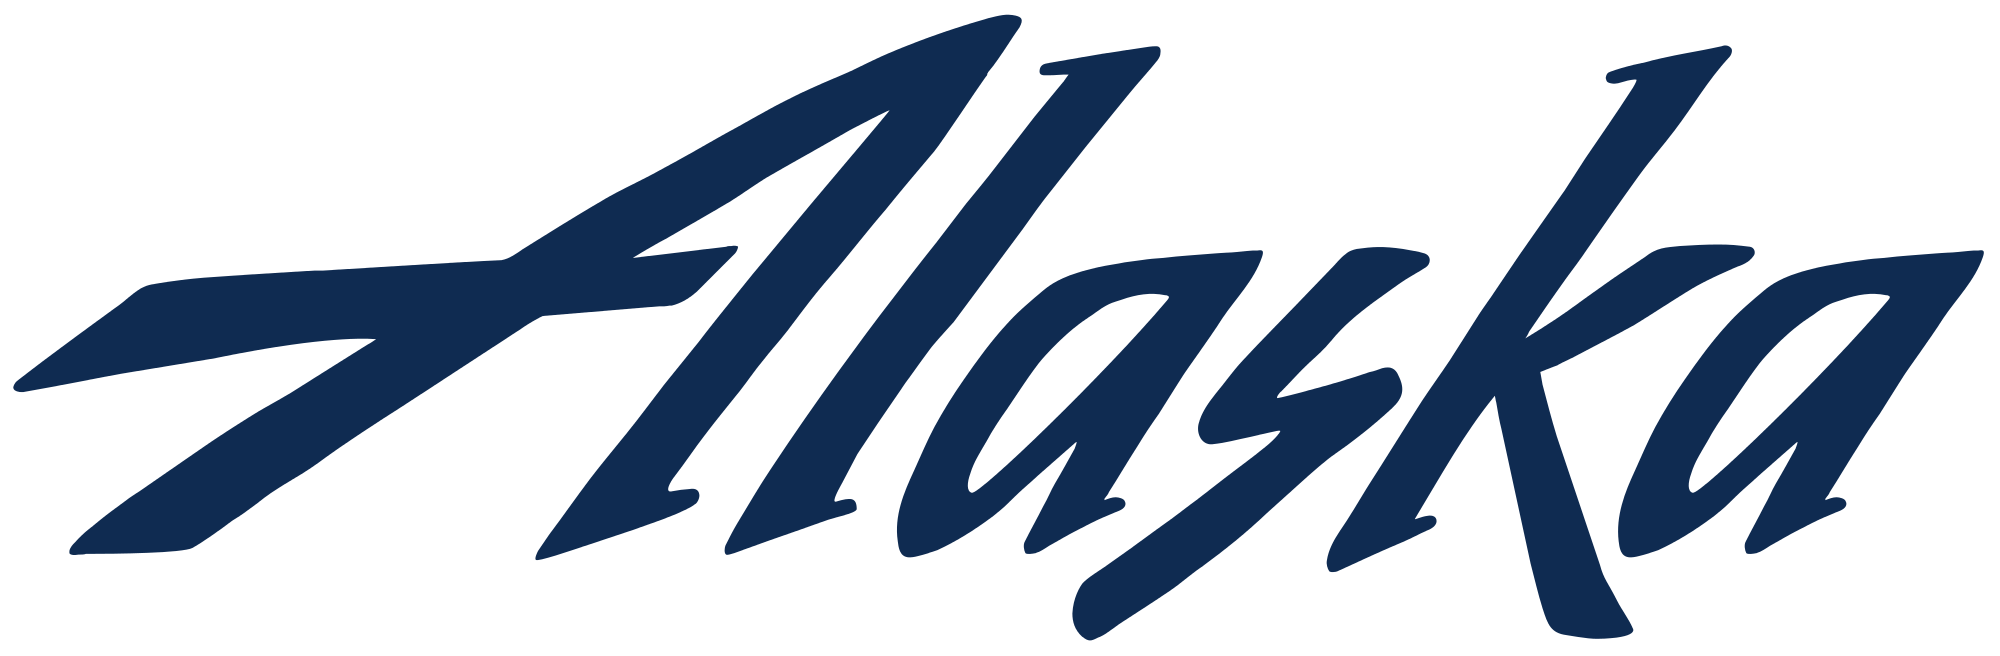 Open  , Alaska Airlines Vector PNG - Free PNG